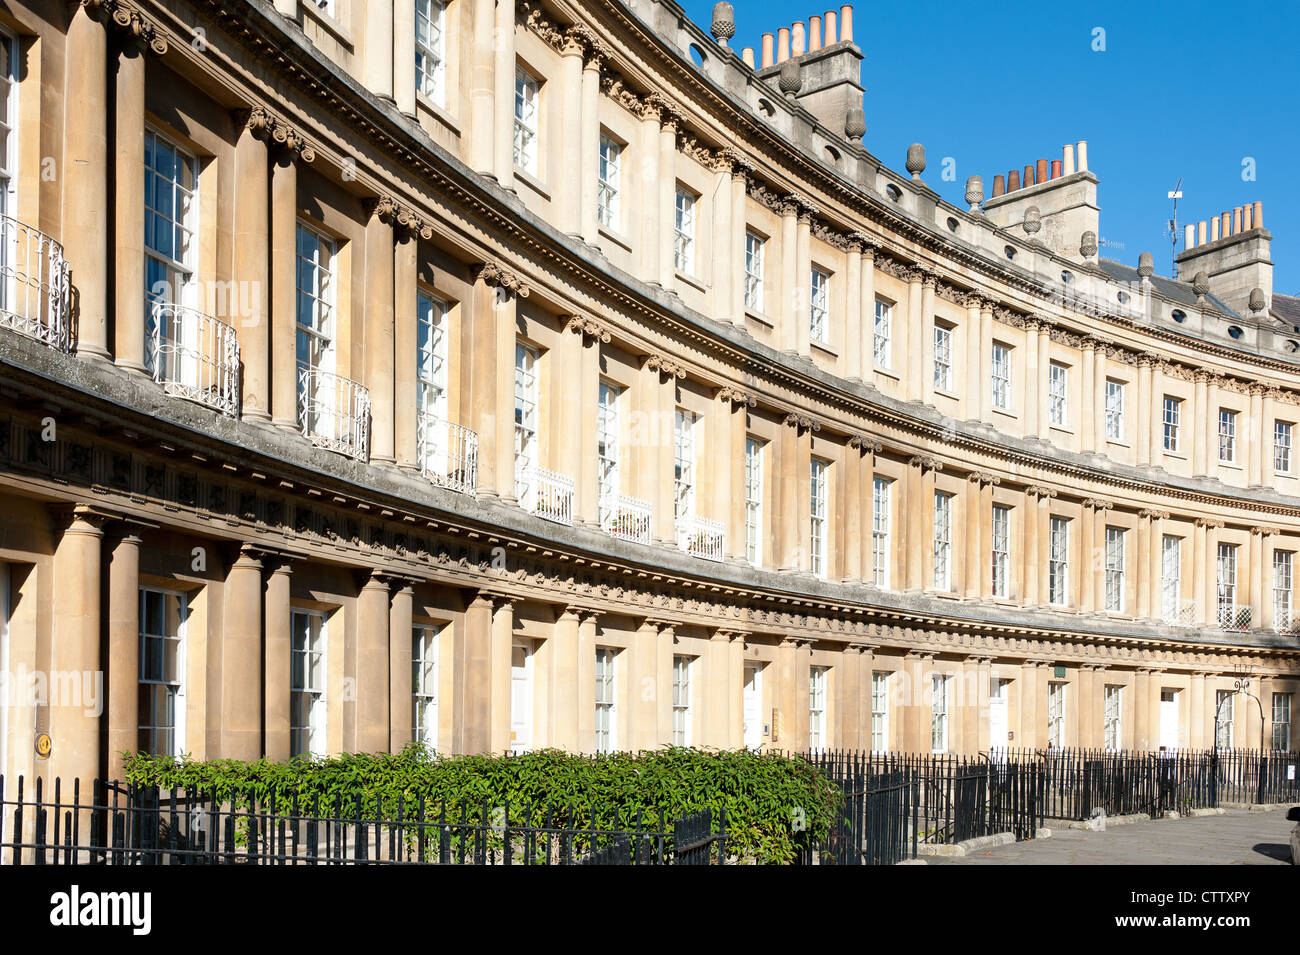 Buildings known as The Circus are an example of Georgian architecture in the city of Bath, Somerset, England, Stock Photo